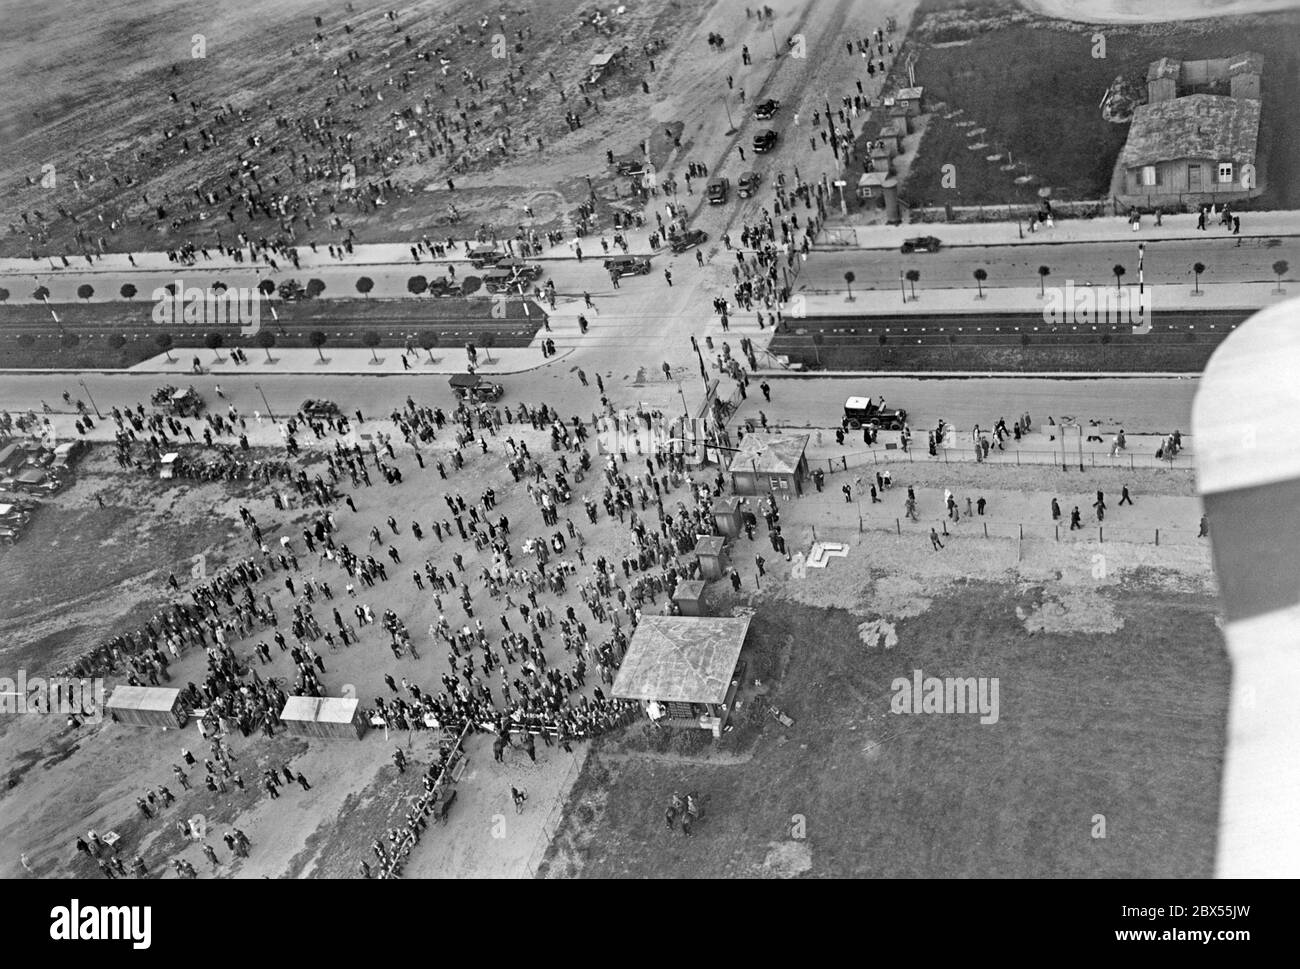 Aerial photo of a crowd of people on Tempelhofer Feld taken by Junkers Luftbild. Stock Photo